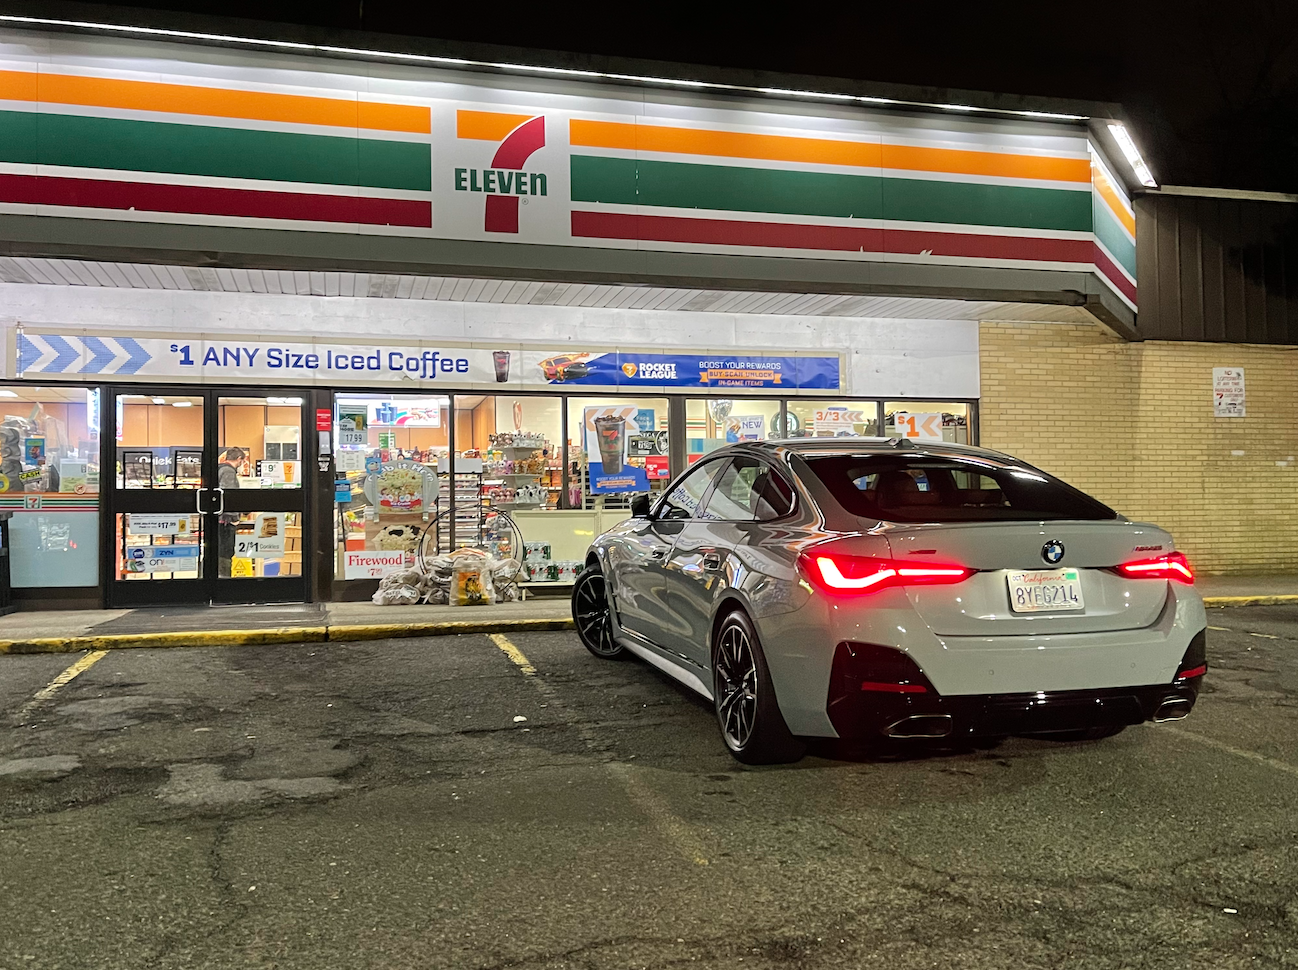 I Took 12 Cars to 7-Eleven and All I Got Were These Stupid Photos